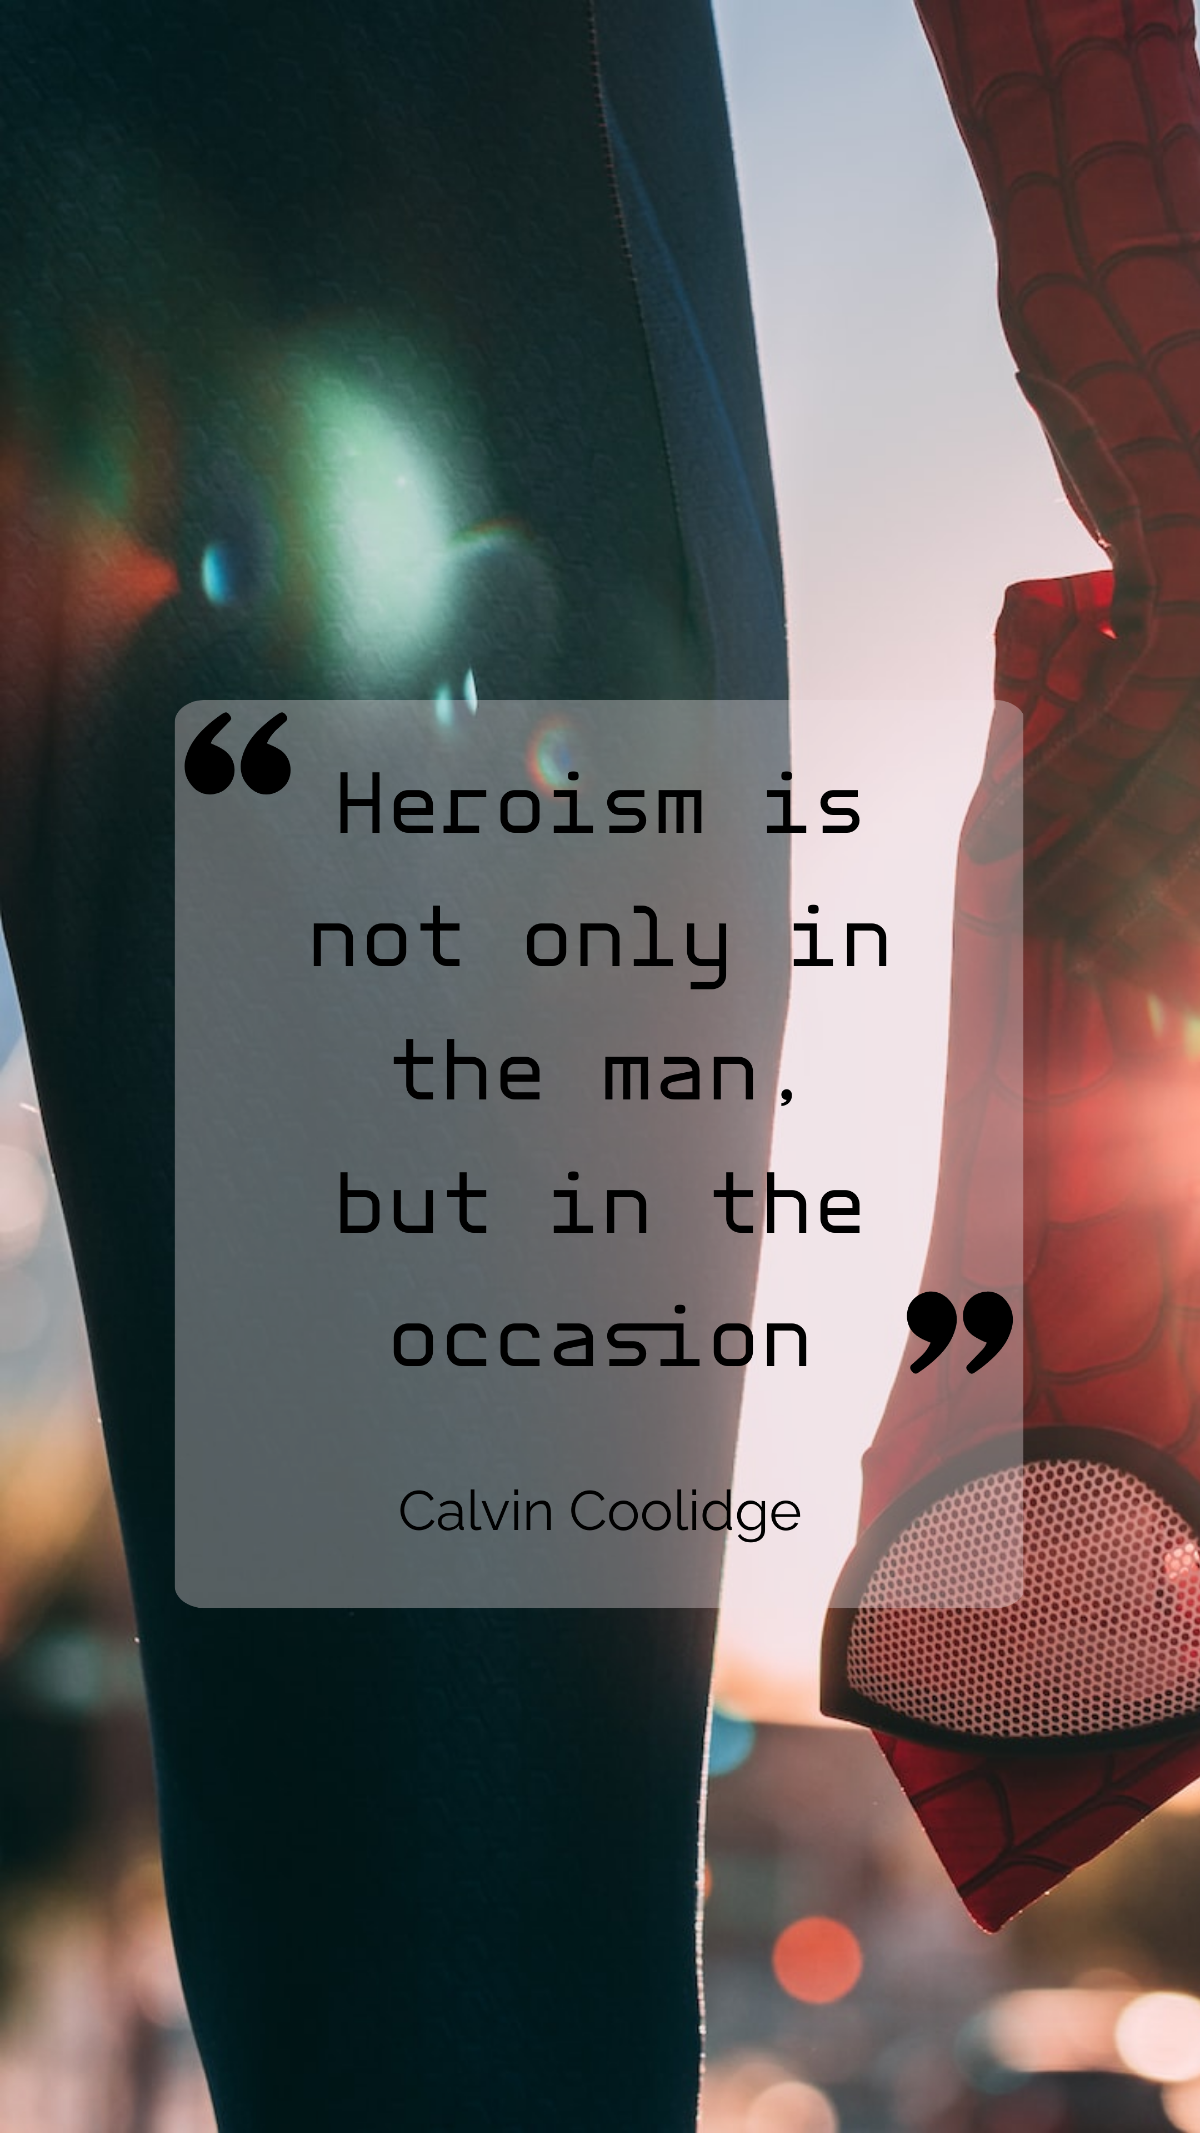 Free Calvin Coolidge - Heroism is not only in the man, but in the occasion Template